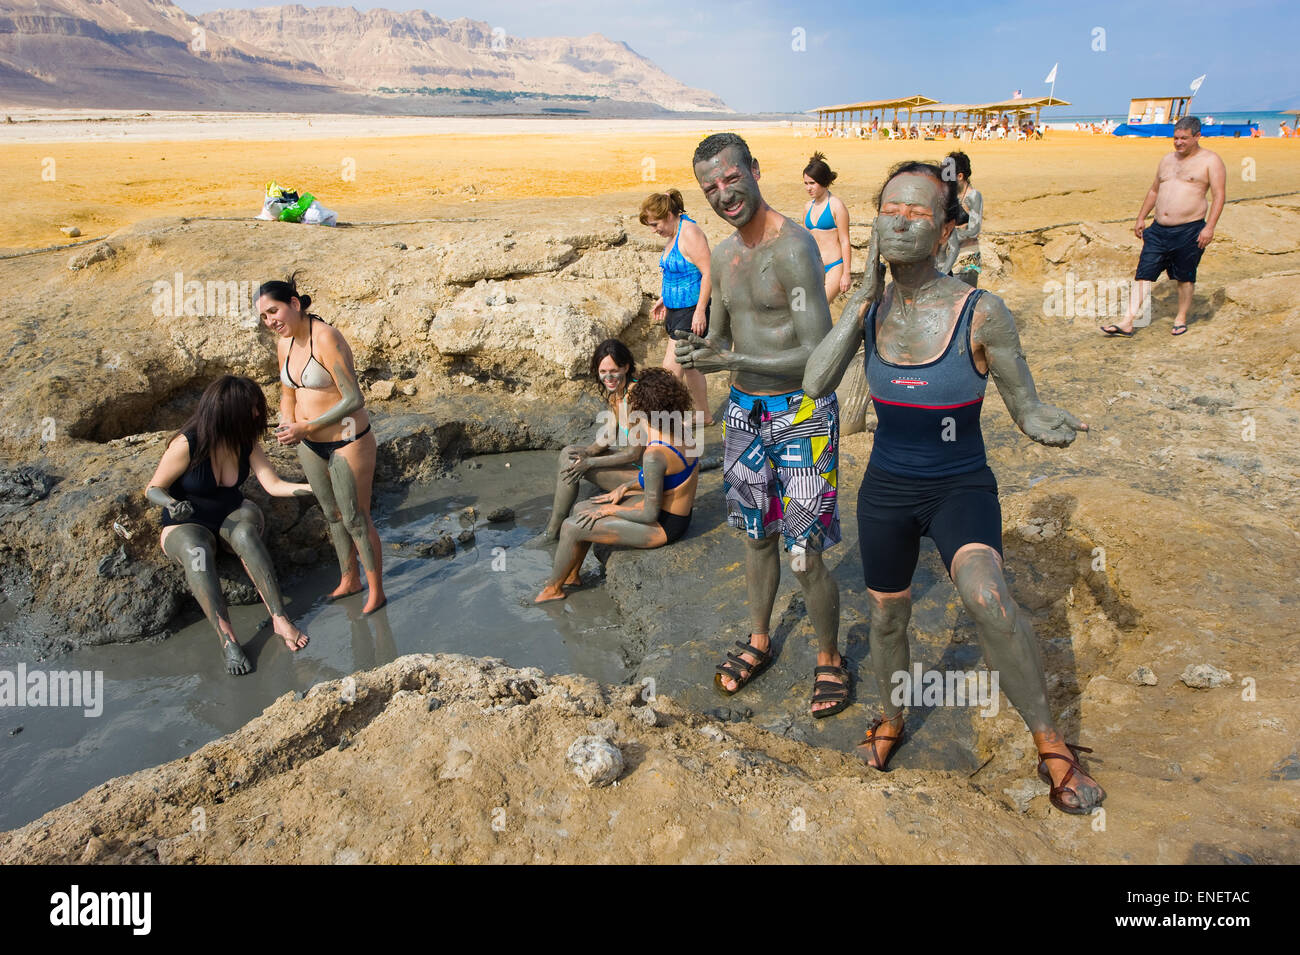 DEAD SEA, ISRAEL - OCT 13, 2014: People rub with mud on the beach of the dead sea in Israel Stock Photo